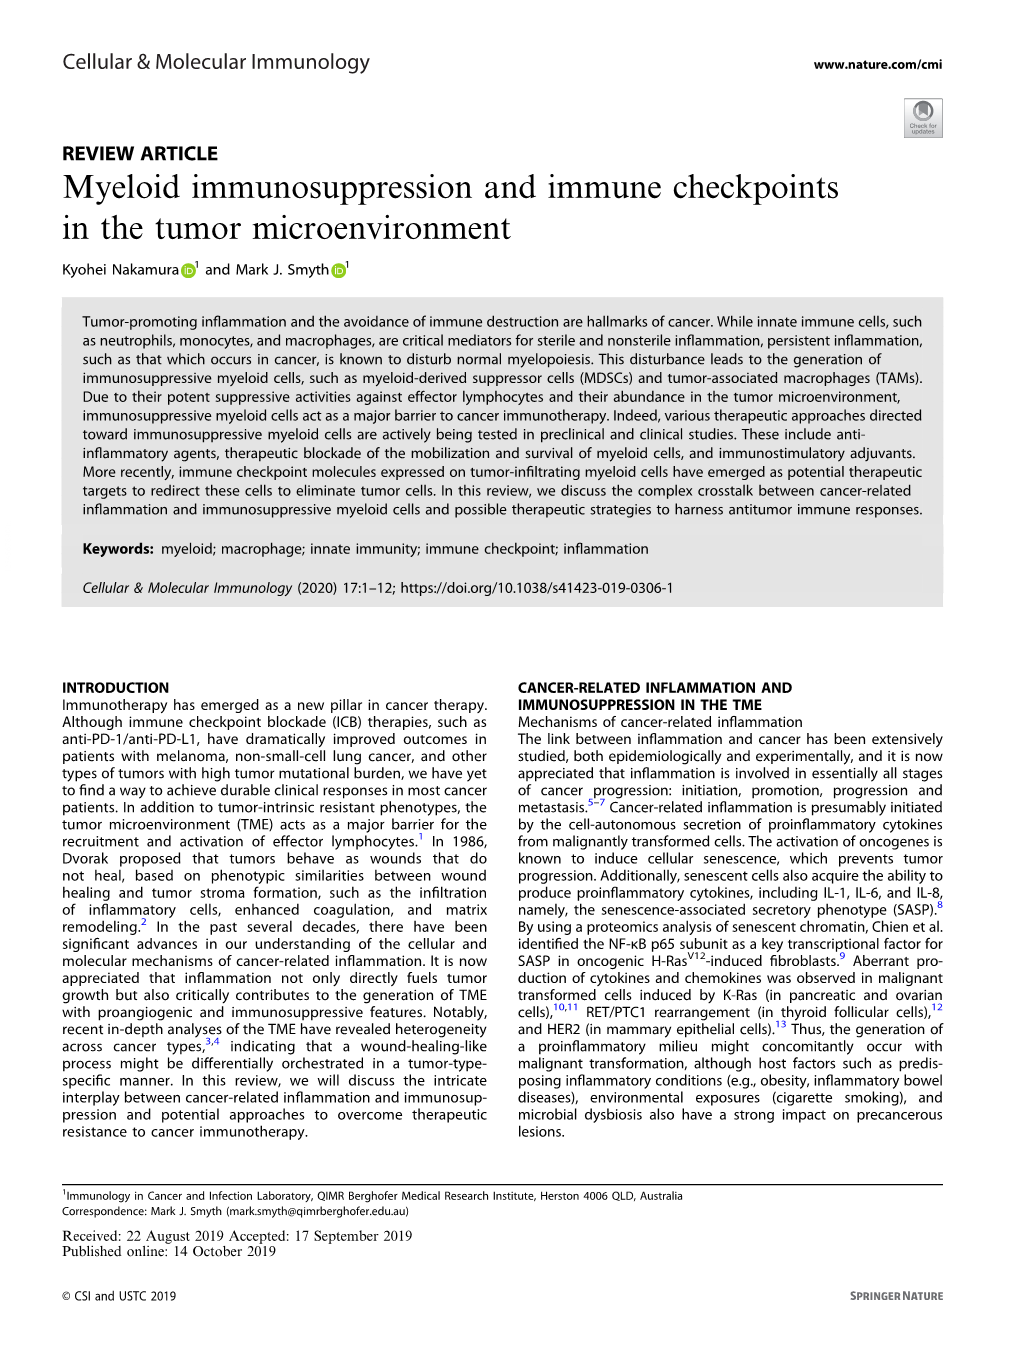 Myeloid Immunosuppression and Immune Checkpoints in the Tumor Microenvironment